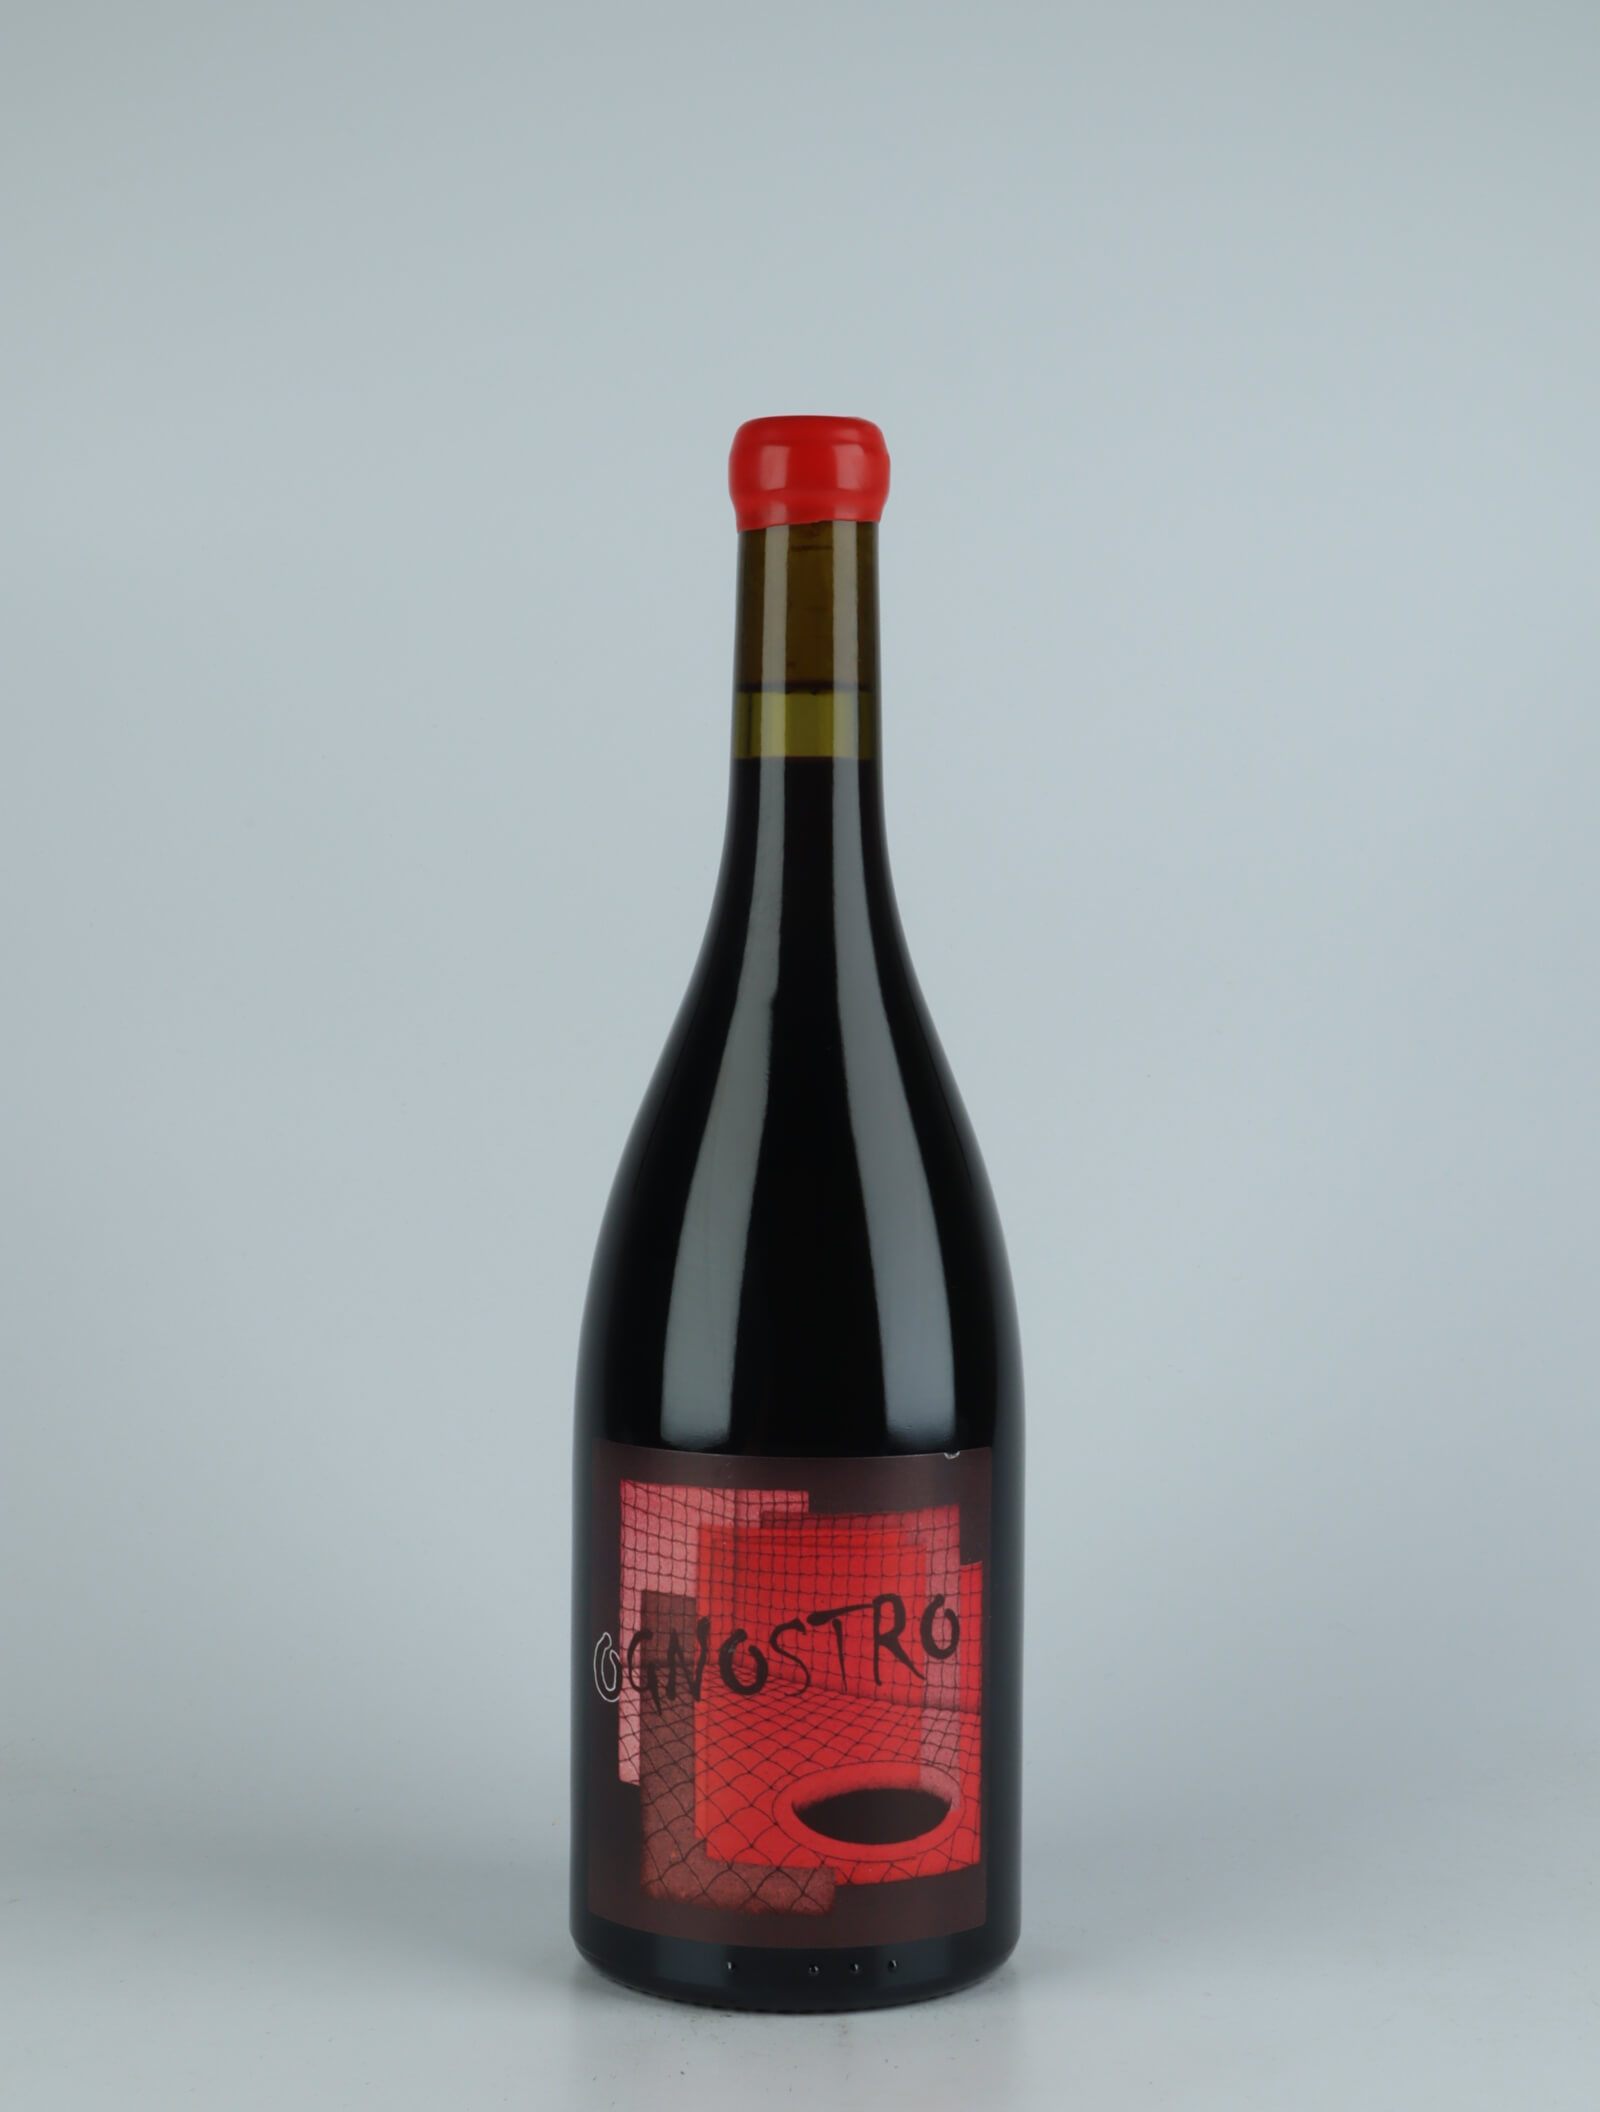 A bottle 2019 Ognostro Rosso Red wine from Marco Tinessa, Campania in Italy